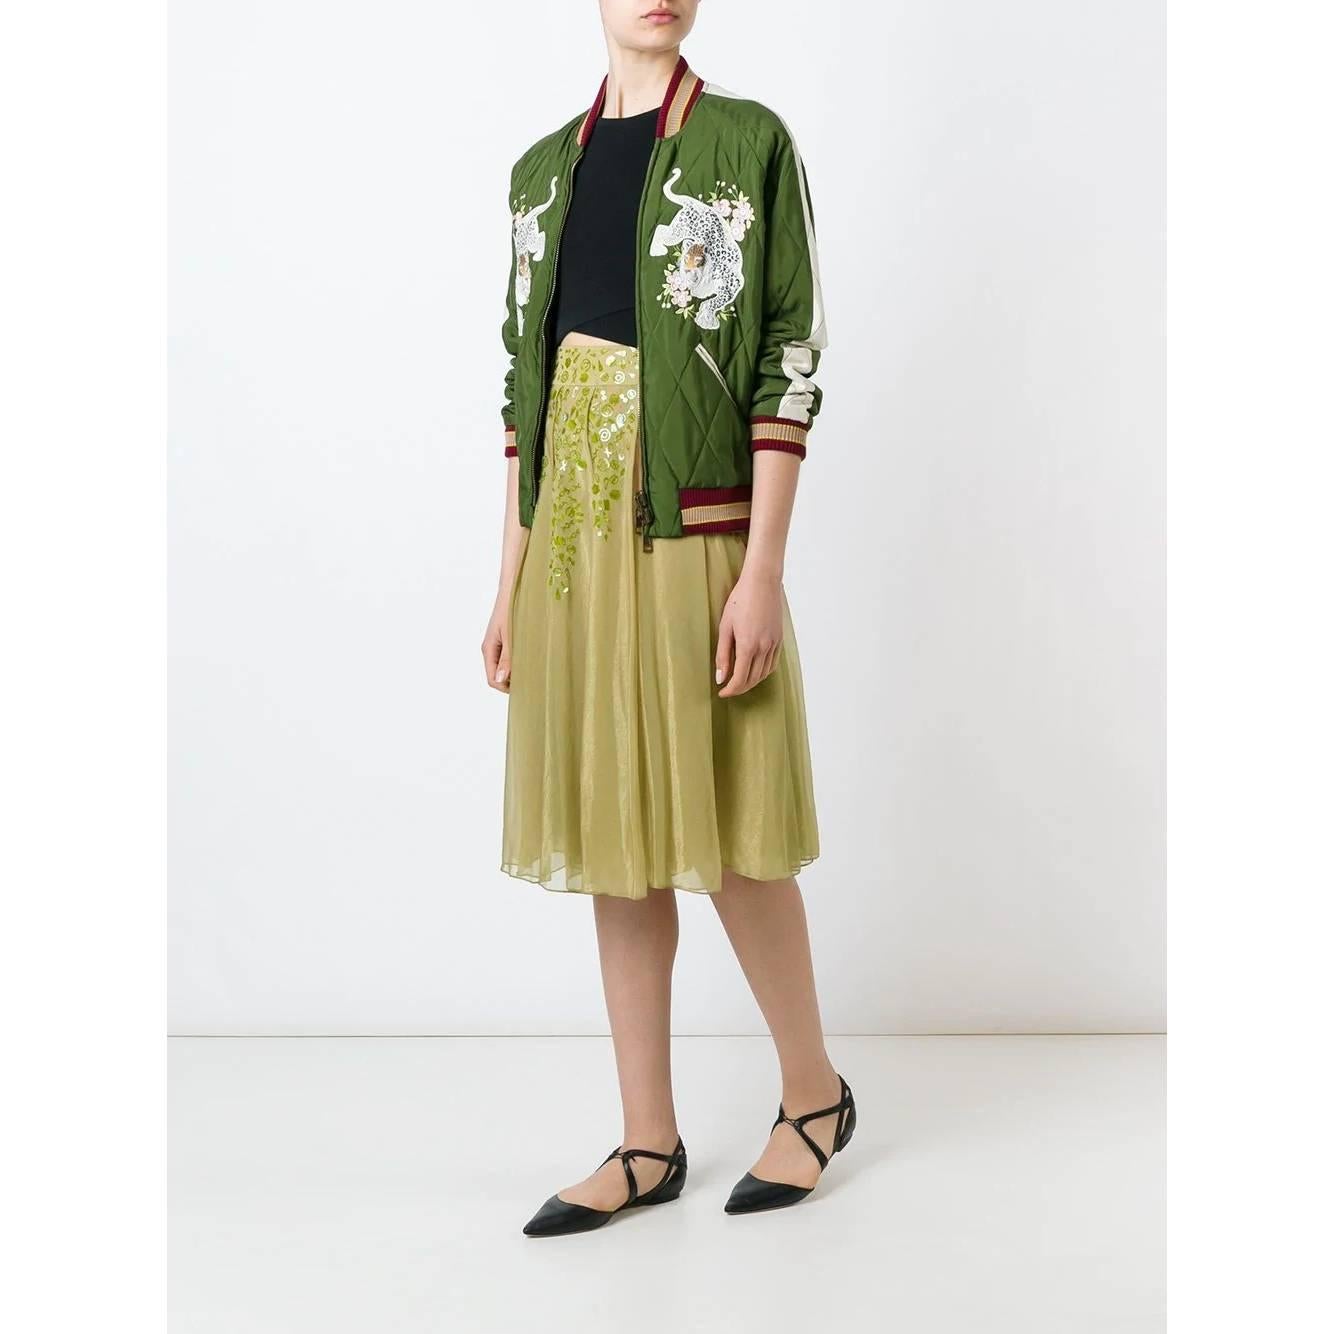 A.N.G.E.L.O. Vintage - ITALY
Romeo Gigli ocher green skirt with a layered design. Model with high waist and pleats at the waist that give movement. Decorative PVC applications and back closure.

The product has some missing applications as shown in